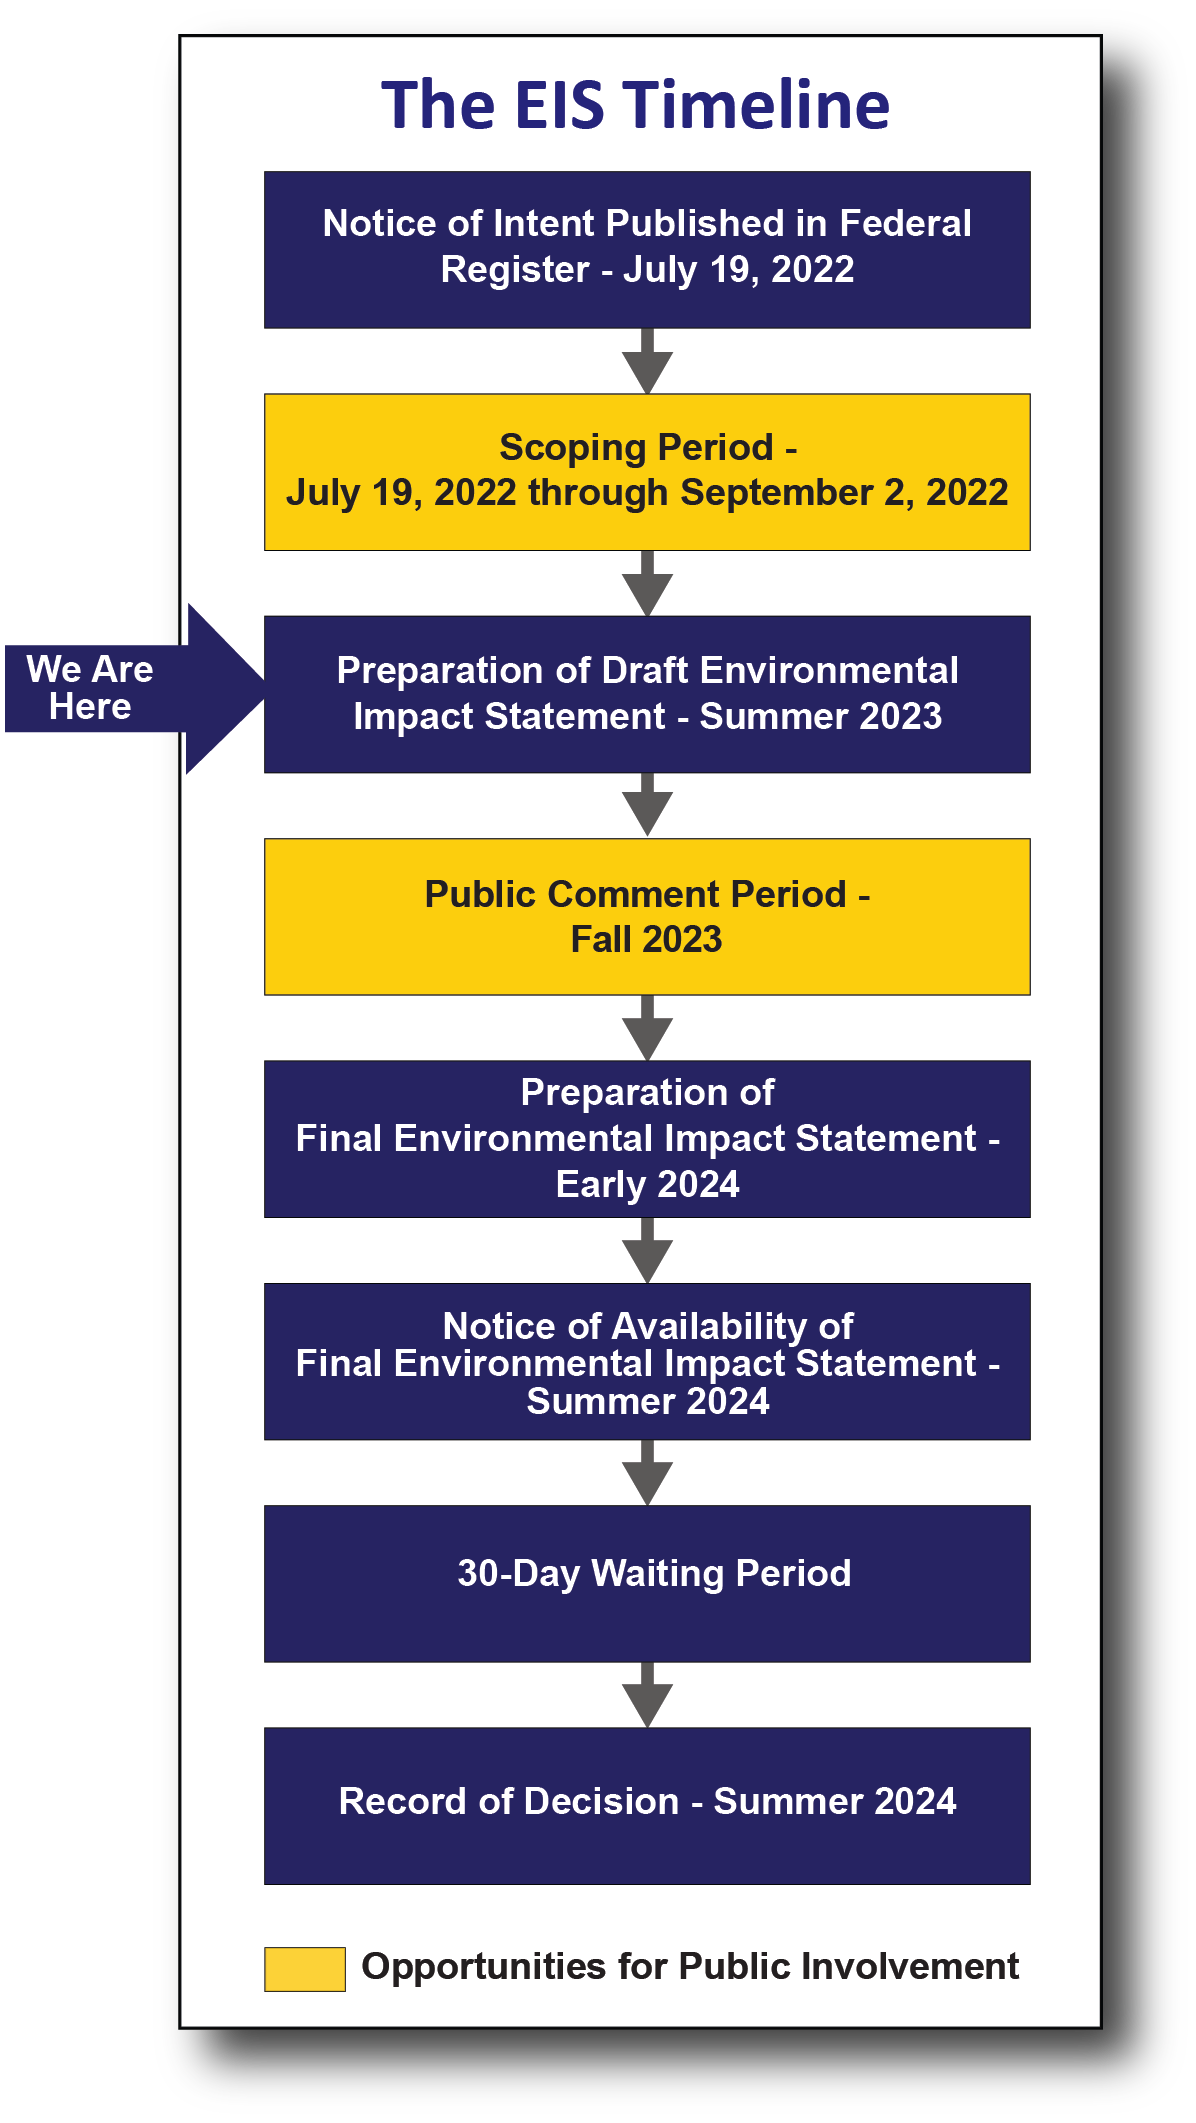 The EIS Timeline. We are currently in the Preparation of Draft EIS phase, summer 2023.